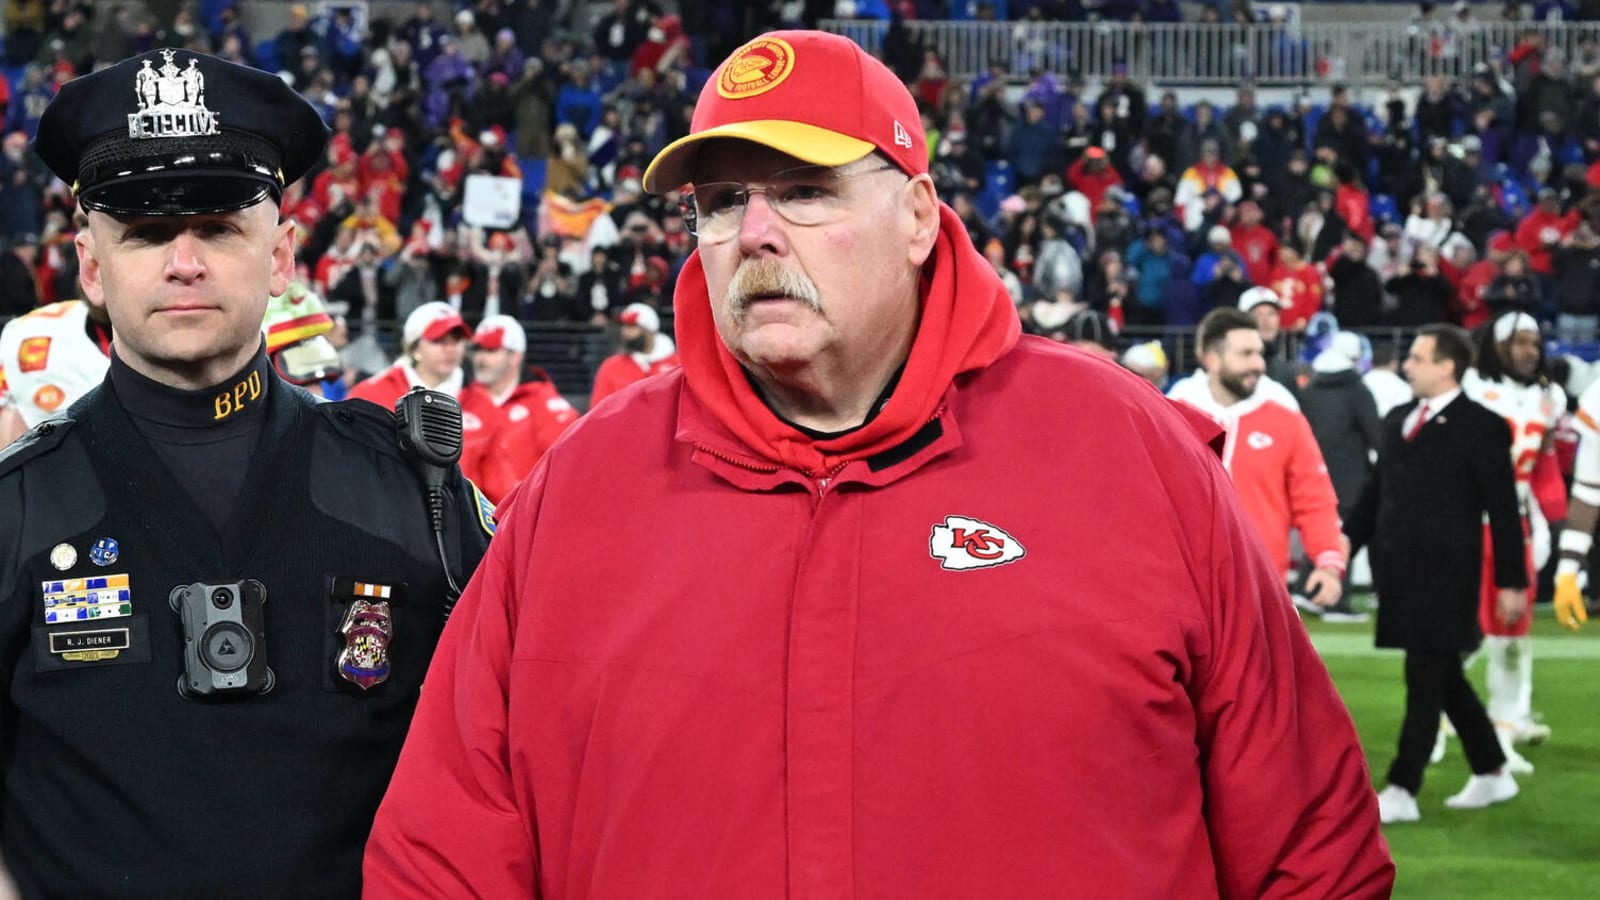 ESPN broadcaster discusses retirement rumors about Andy Reid